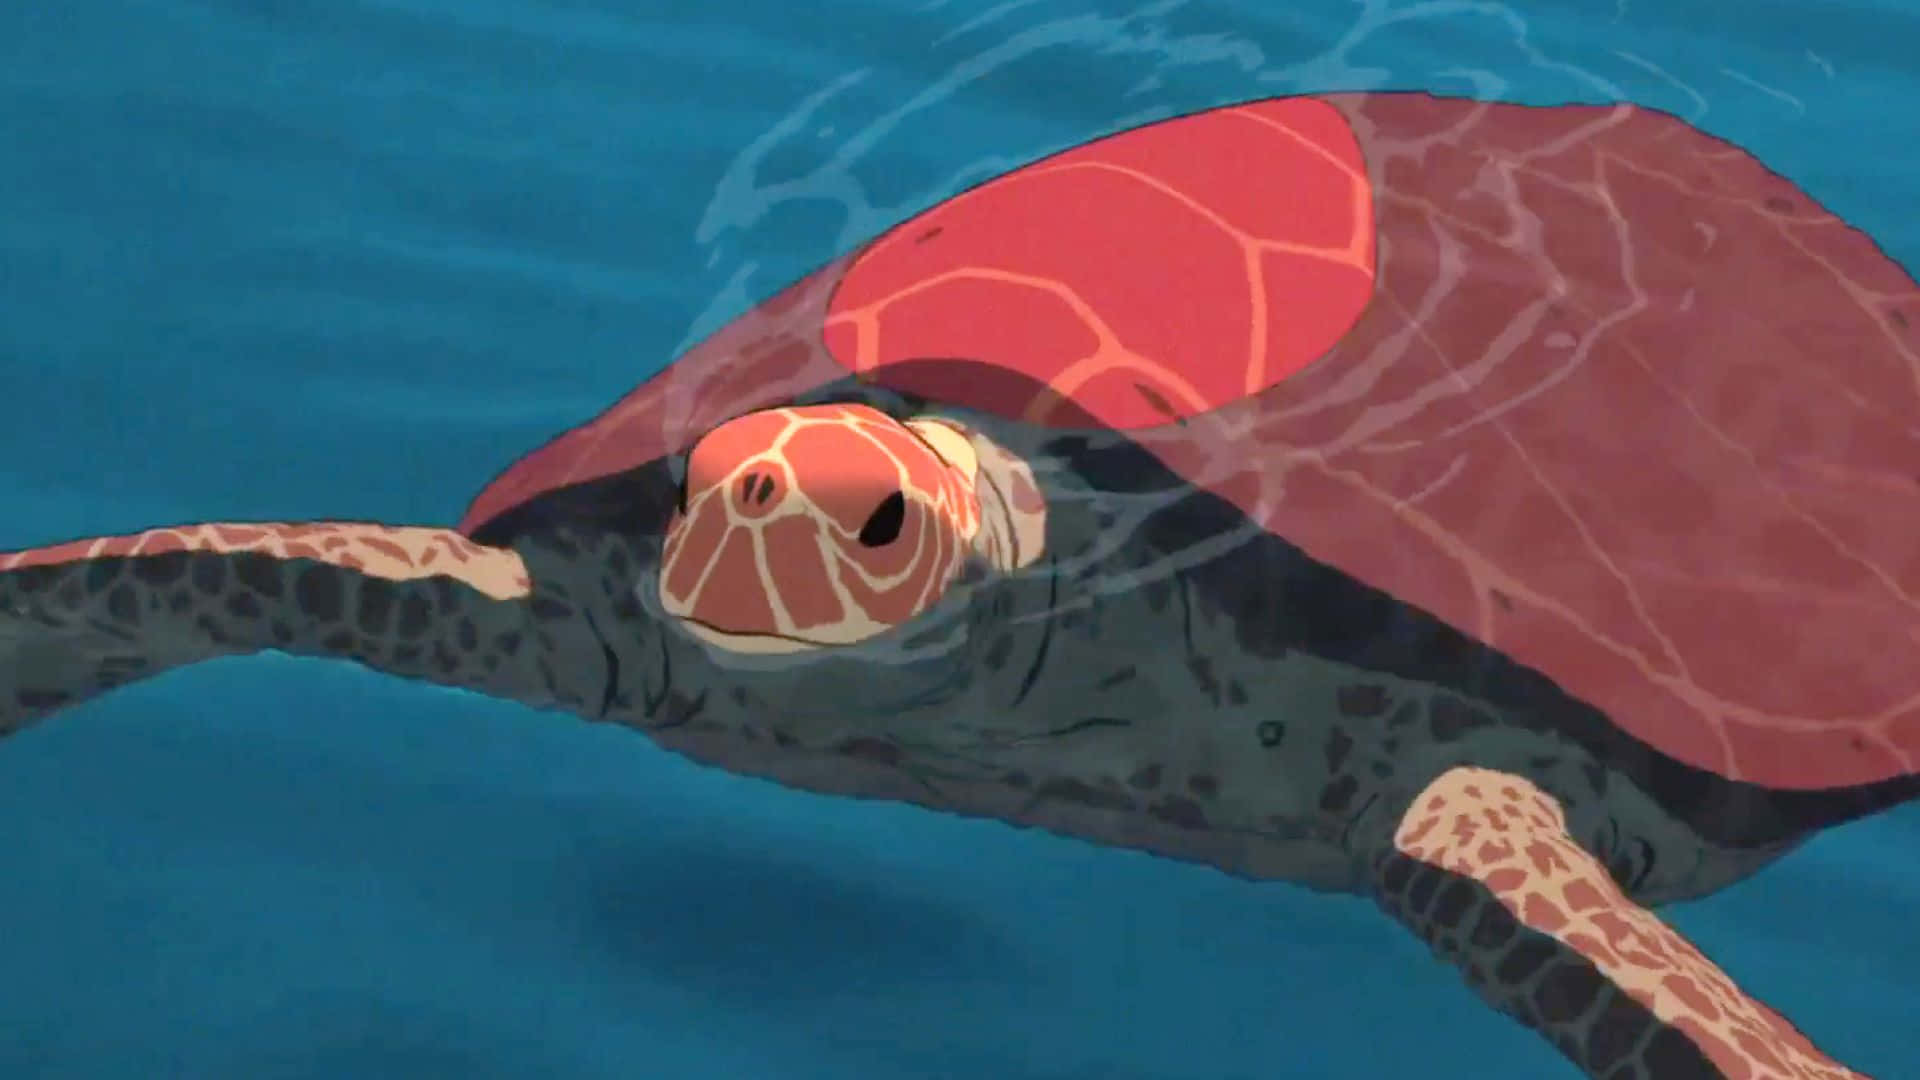 The Red Turtle and its oceanic journey Wallpaper